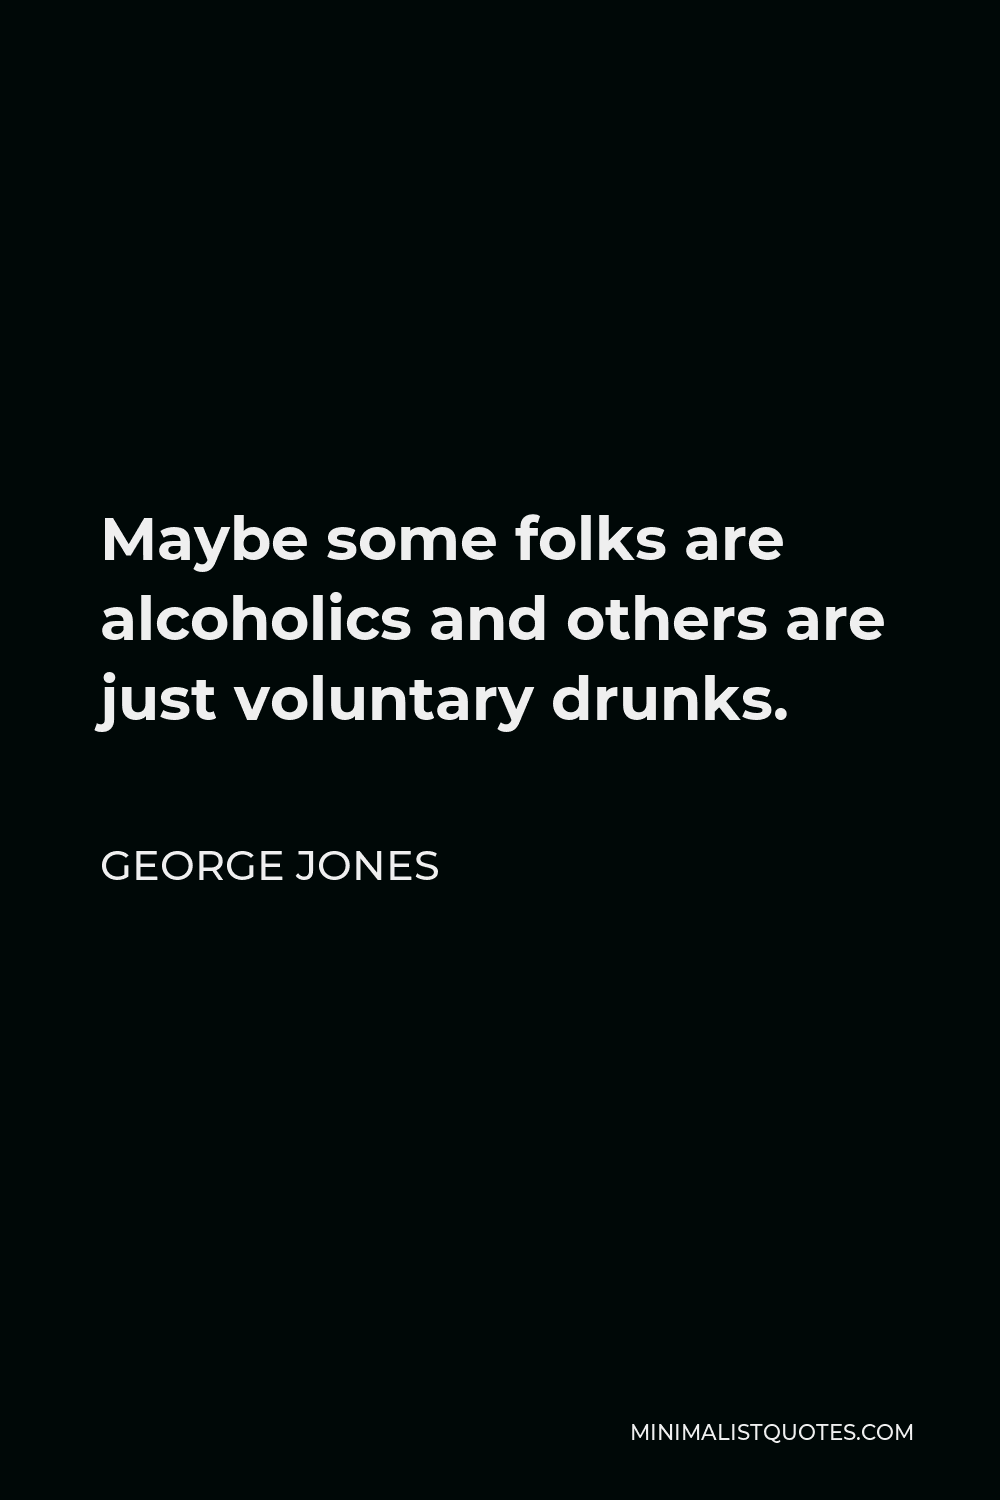 George Jones Quote - Maybe some folks are alcoholics and others are just voluntary drunks.